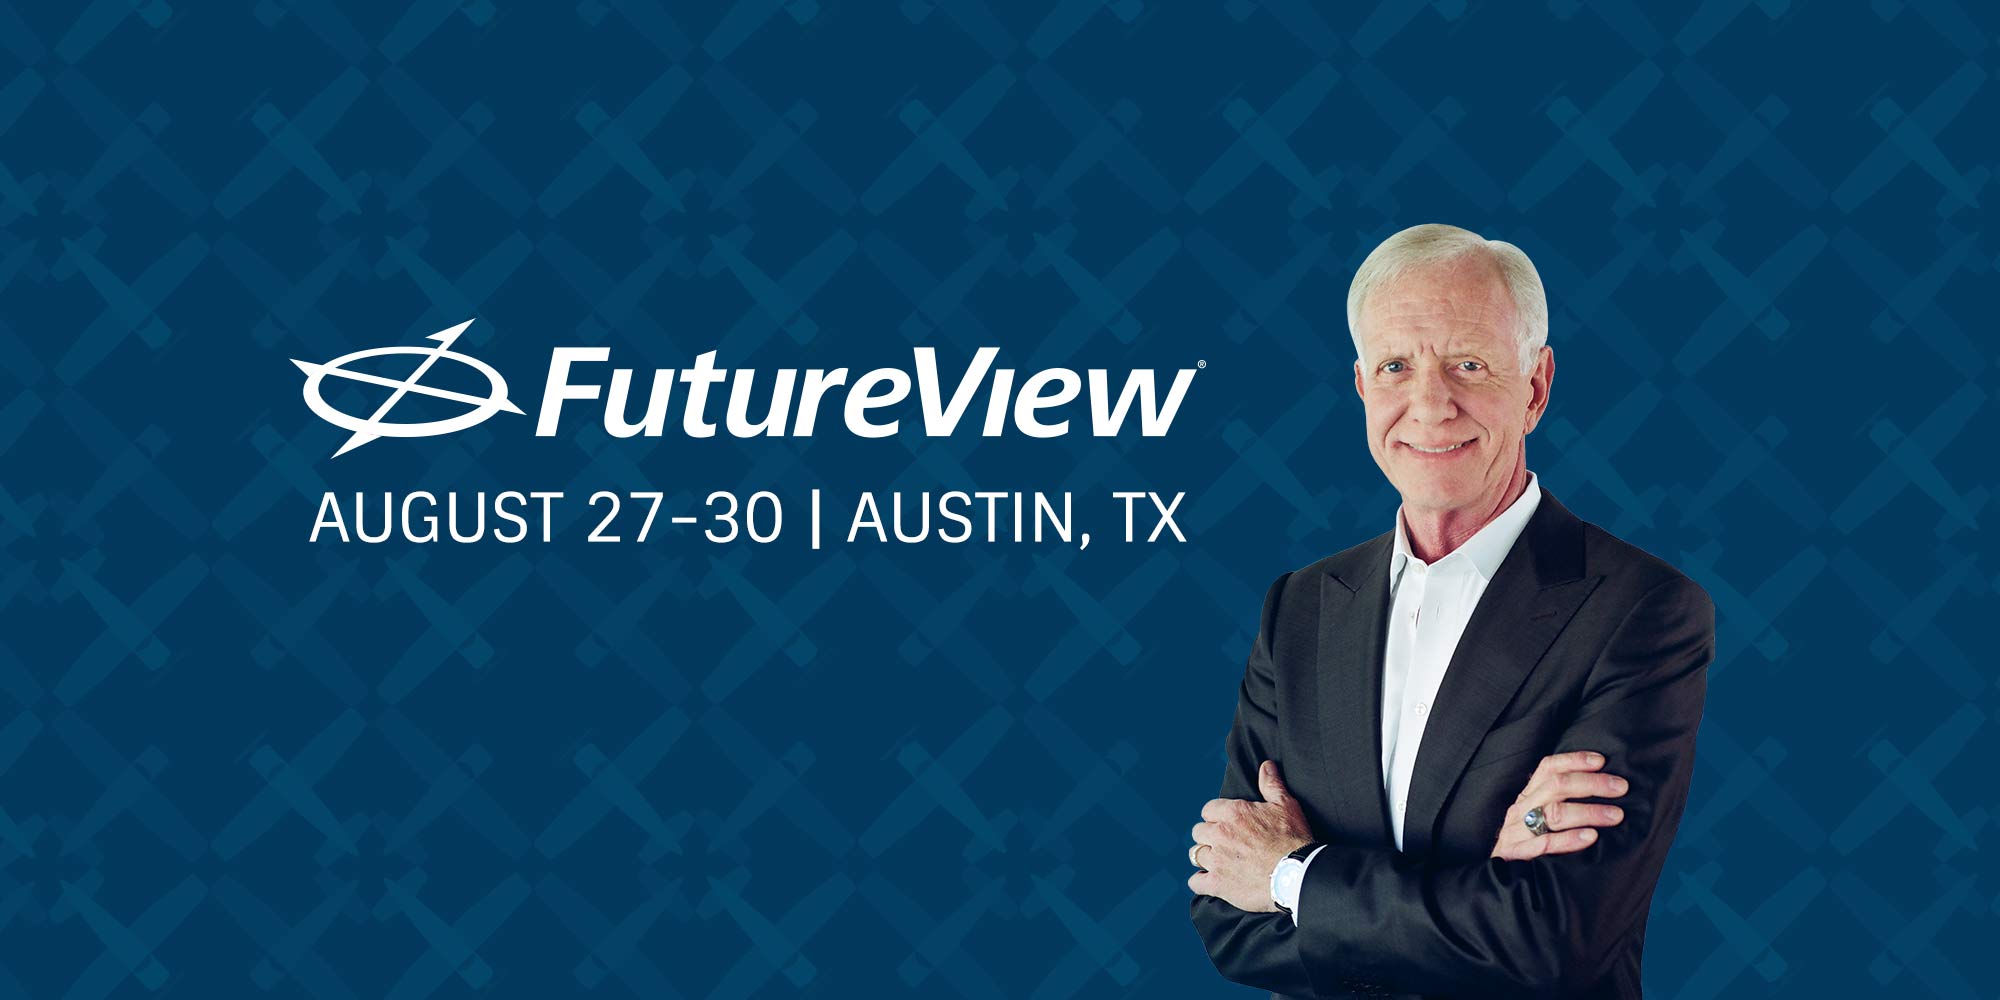 FutureView 2018 Keynote: Sully Sullenberger